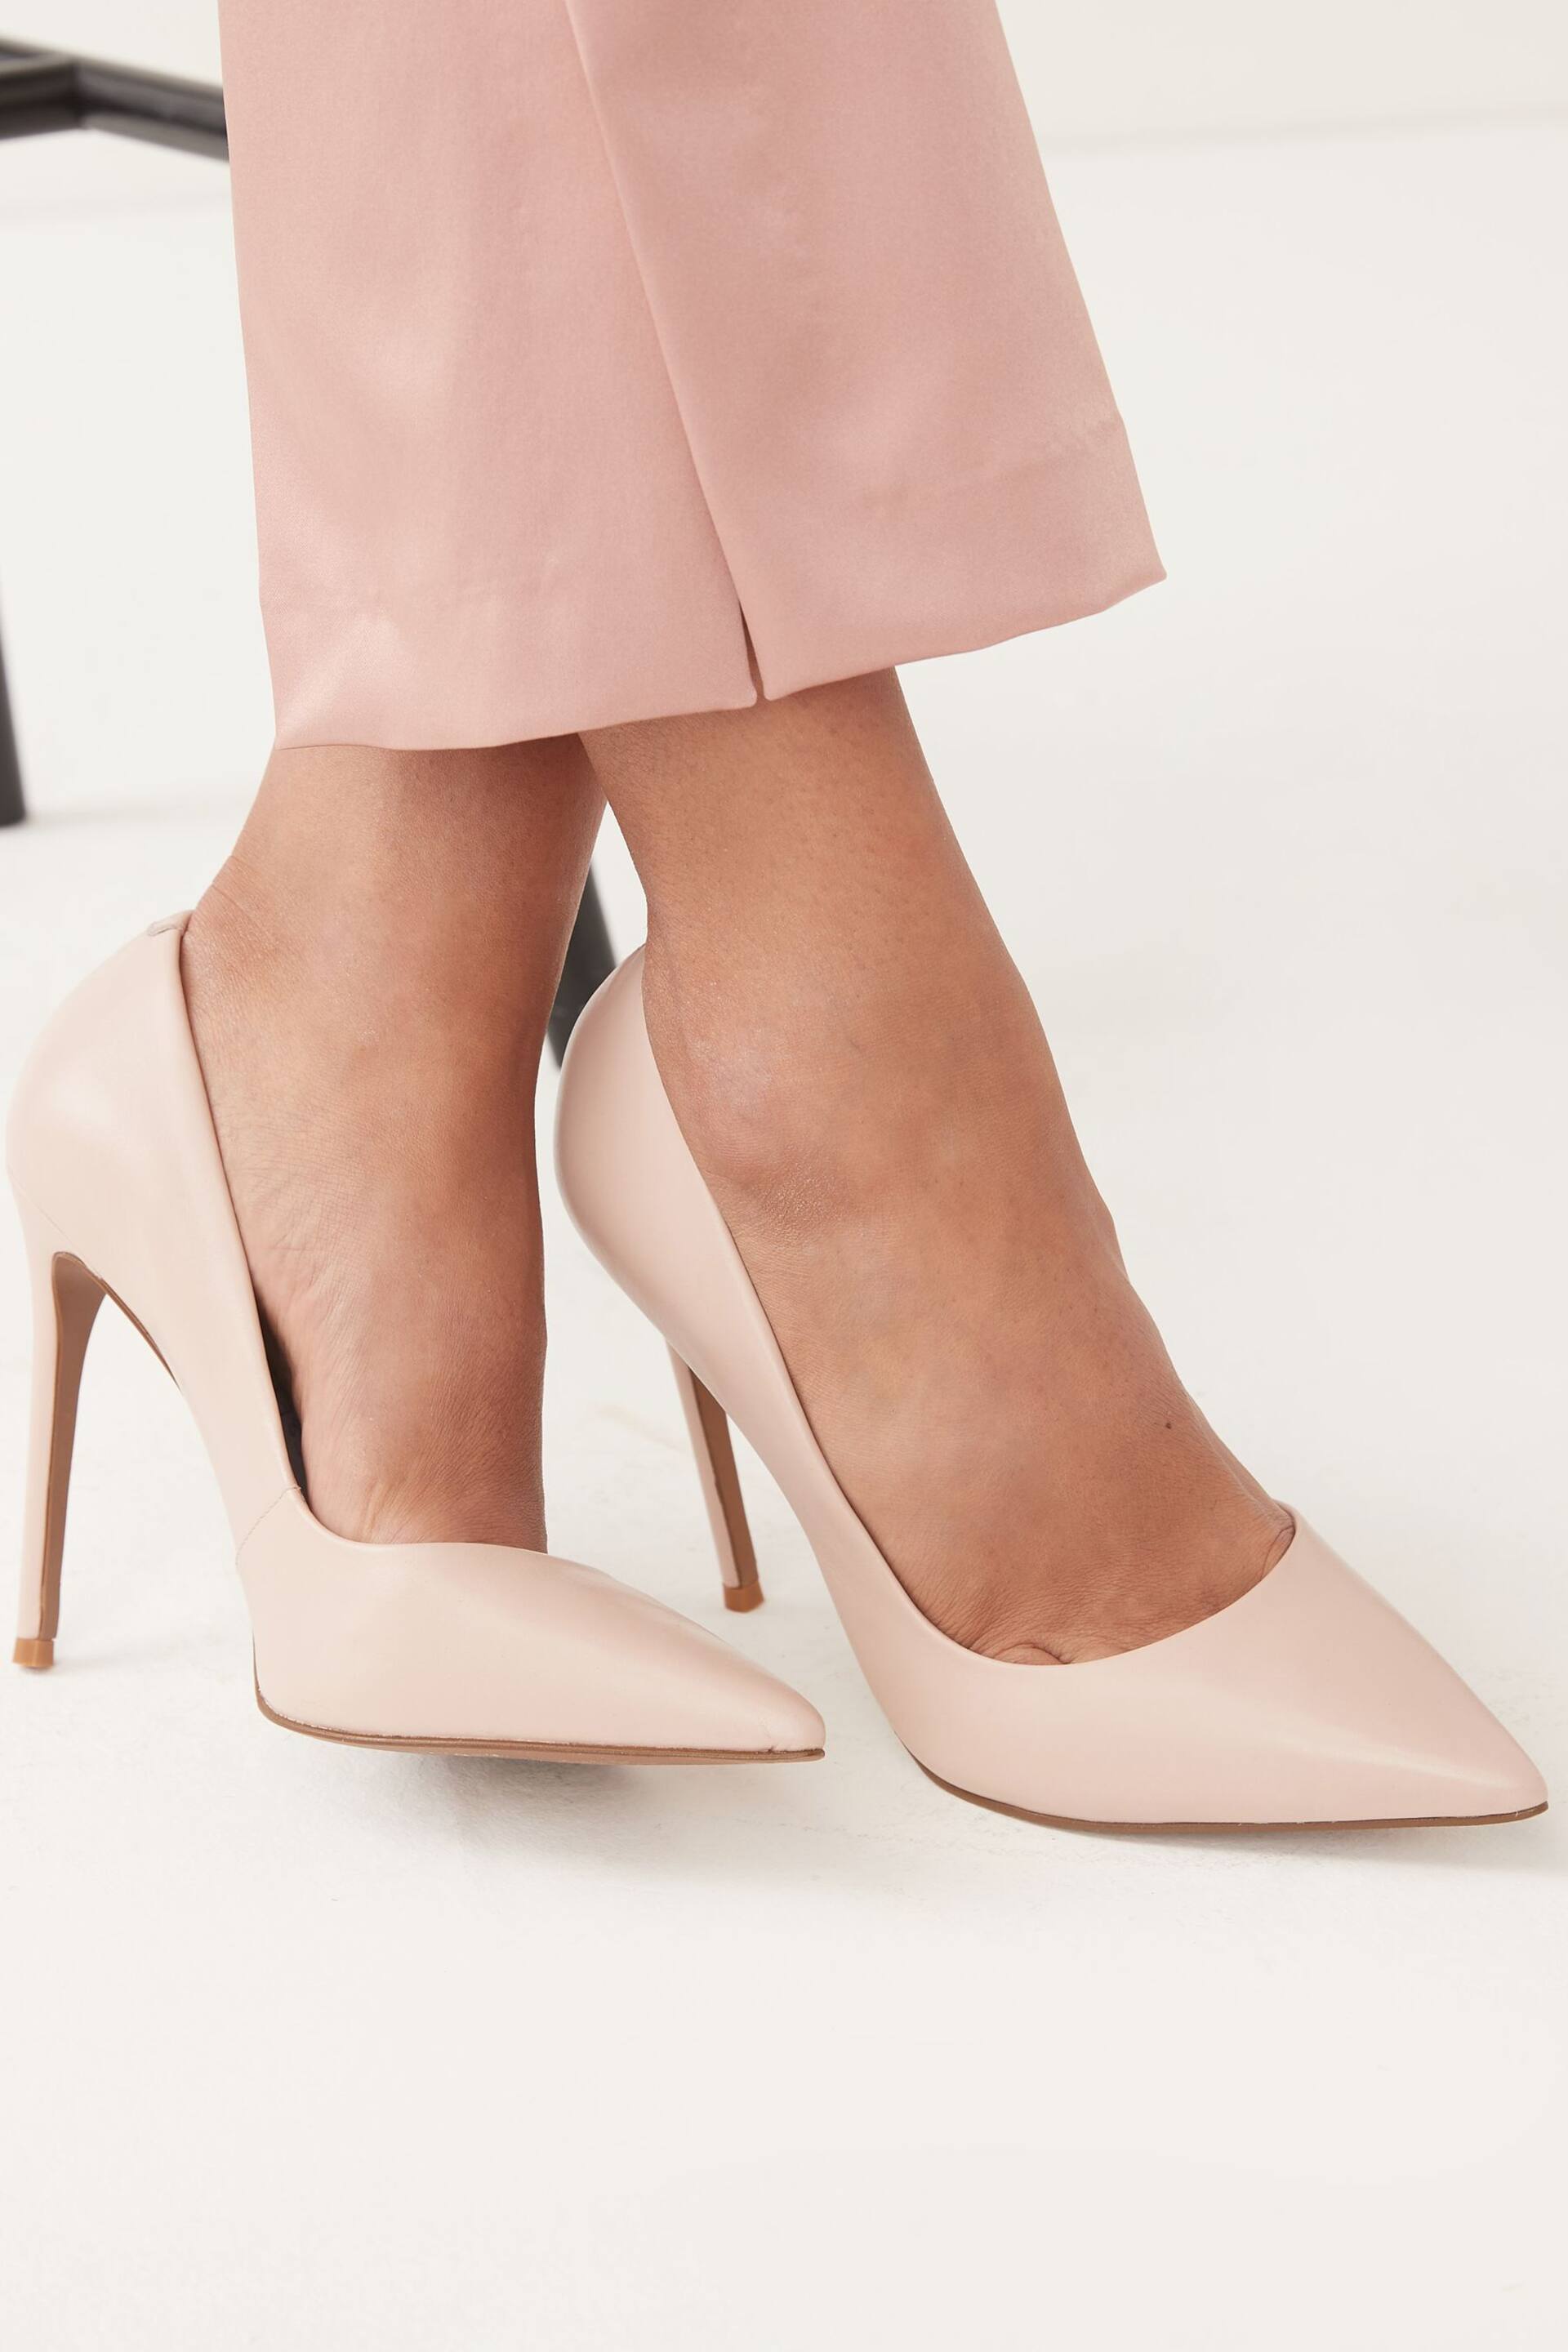 Nude Pink Signature Leather Court Shoes - Image 2 of 7